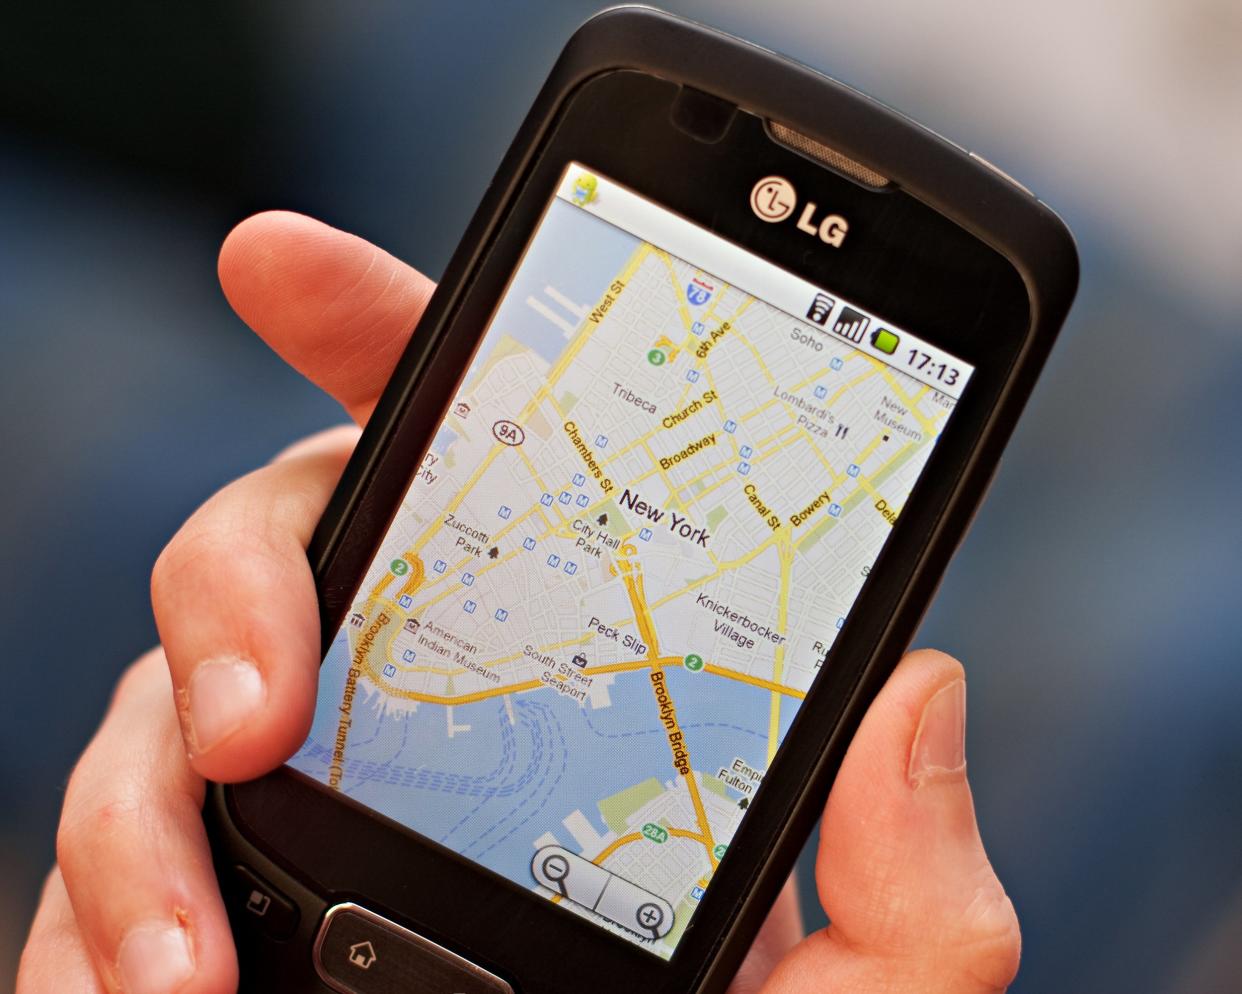 hand holding a smartphone with screen showing the Google maps app, satellite view of New York City